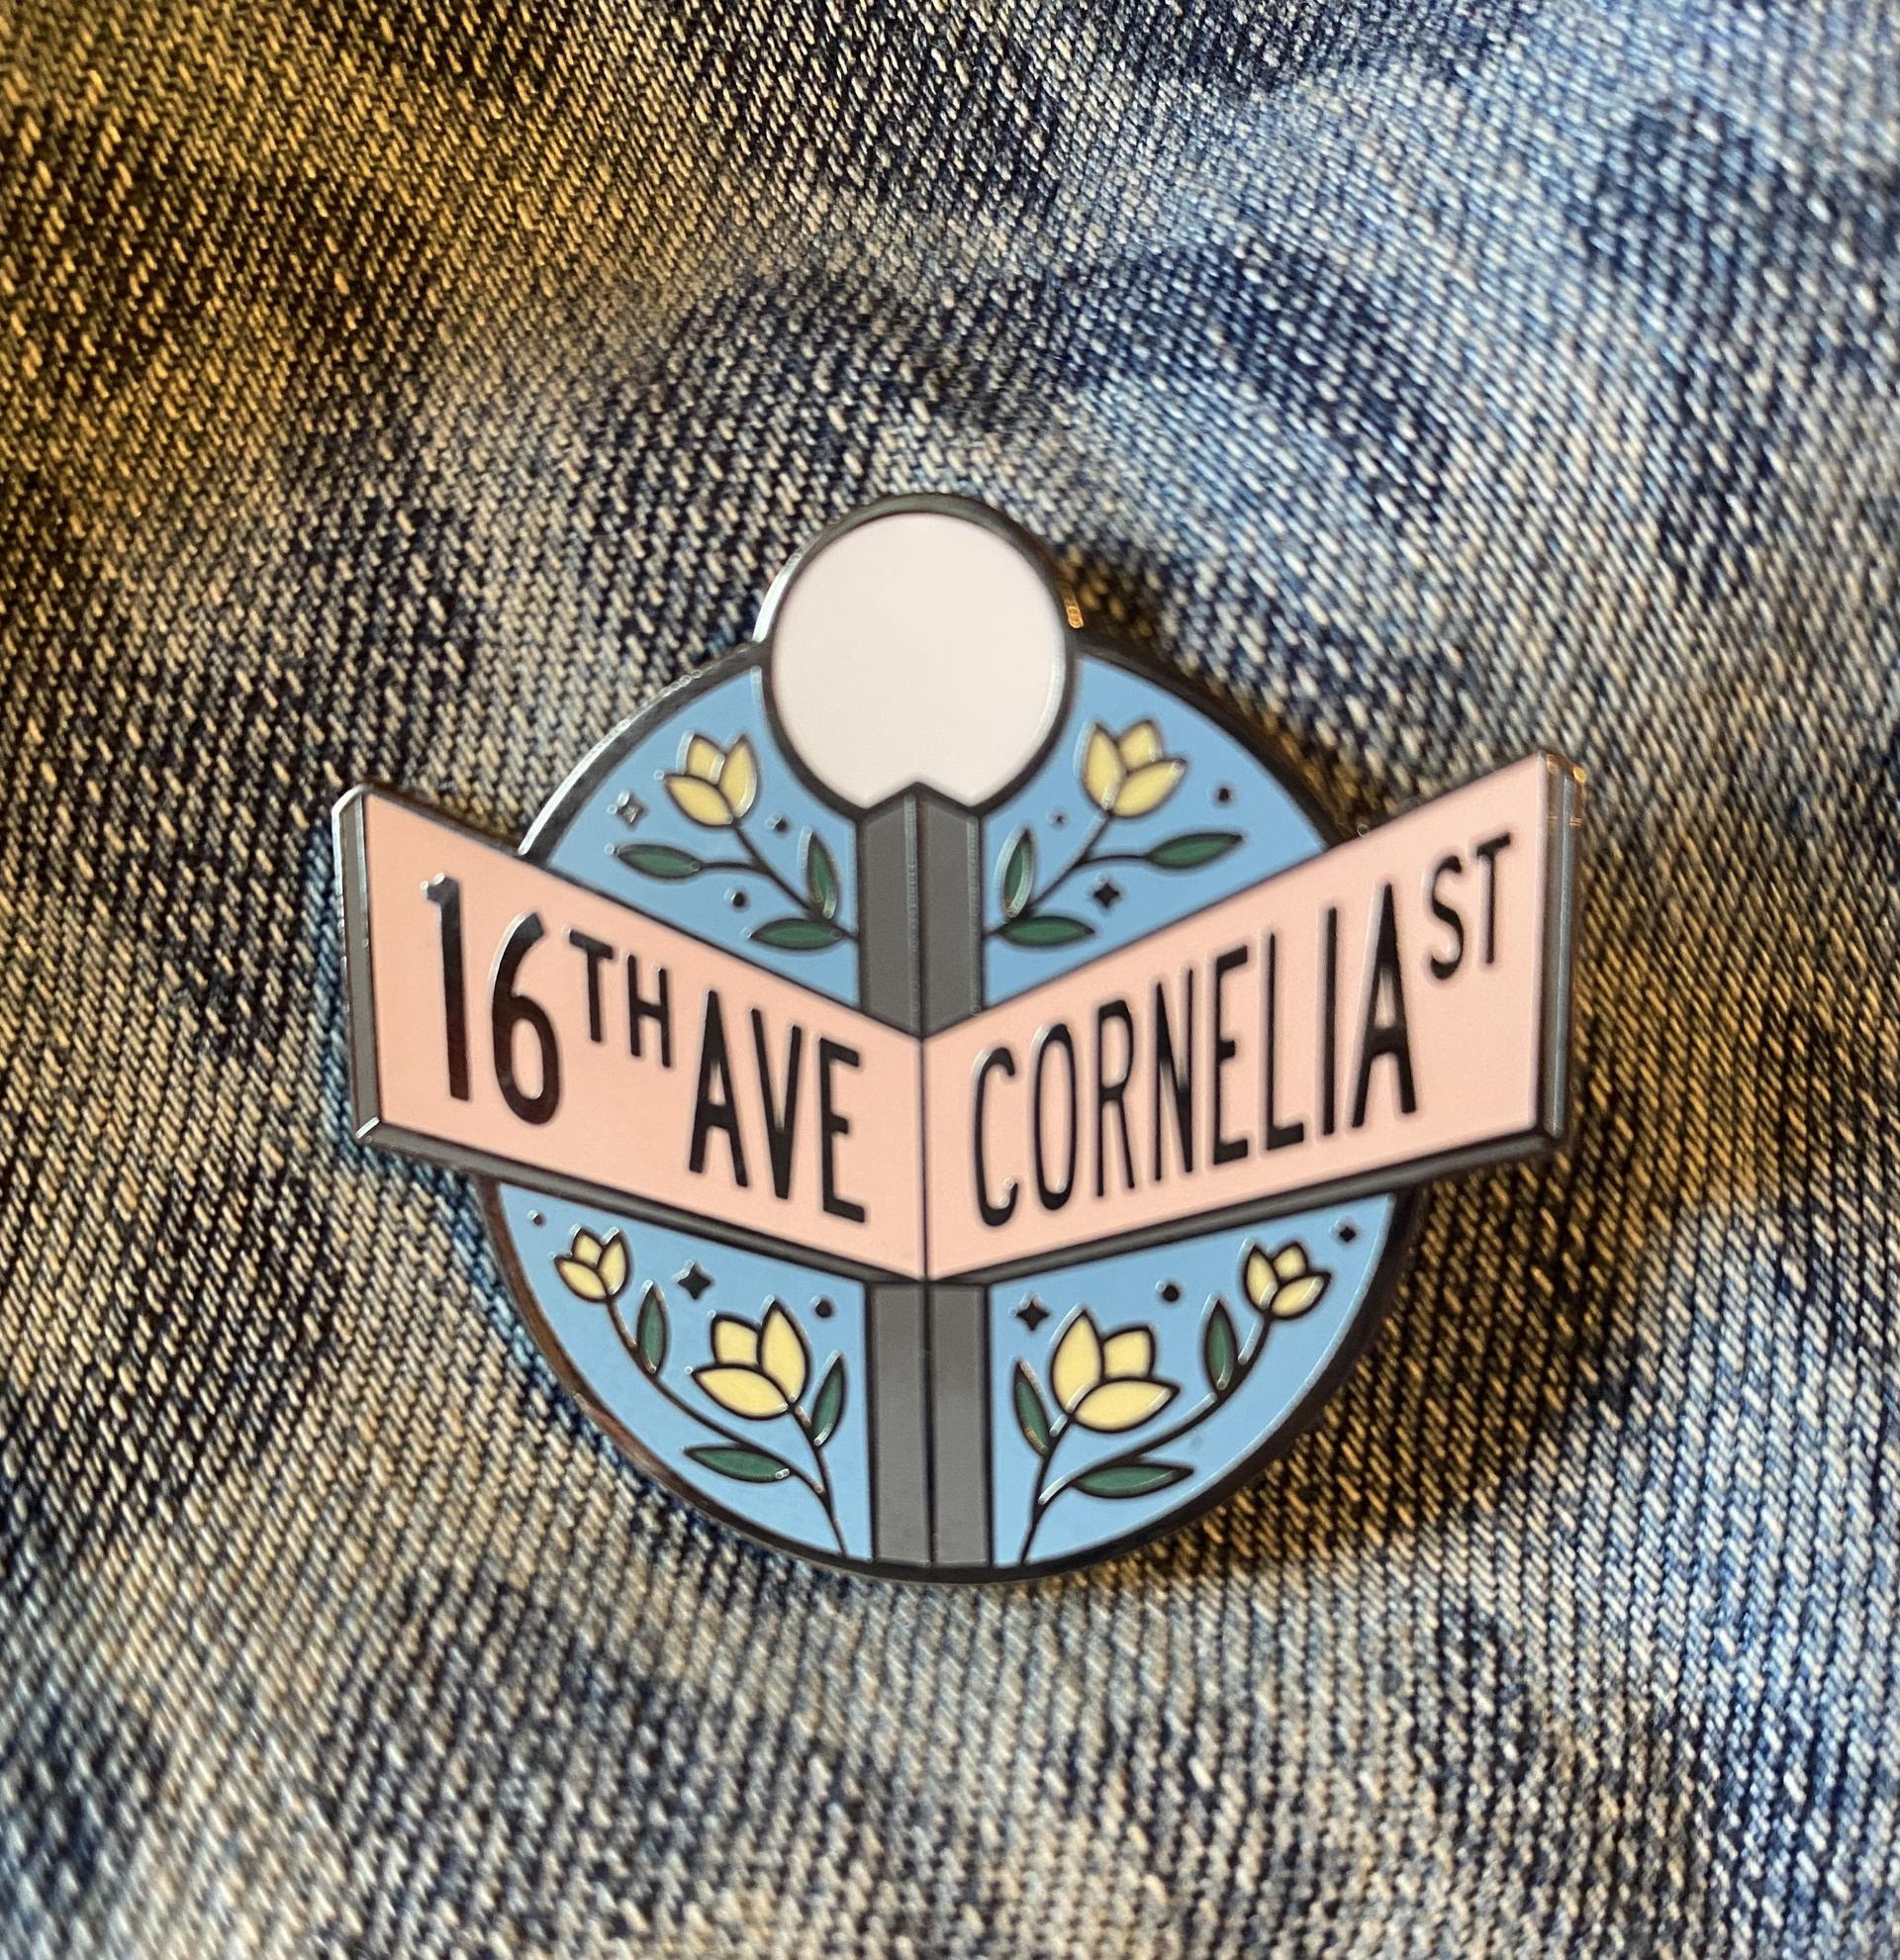 enamel pin illustrated with a street sign at the cross of 16th ave and cornelia street